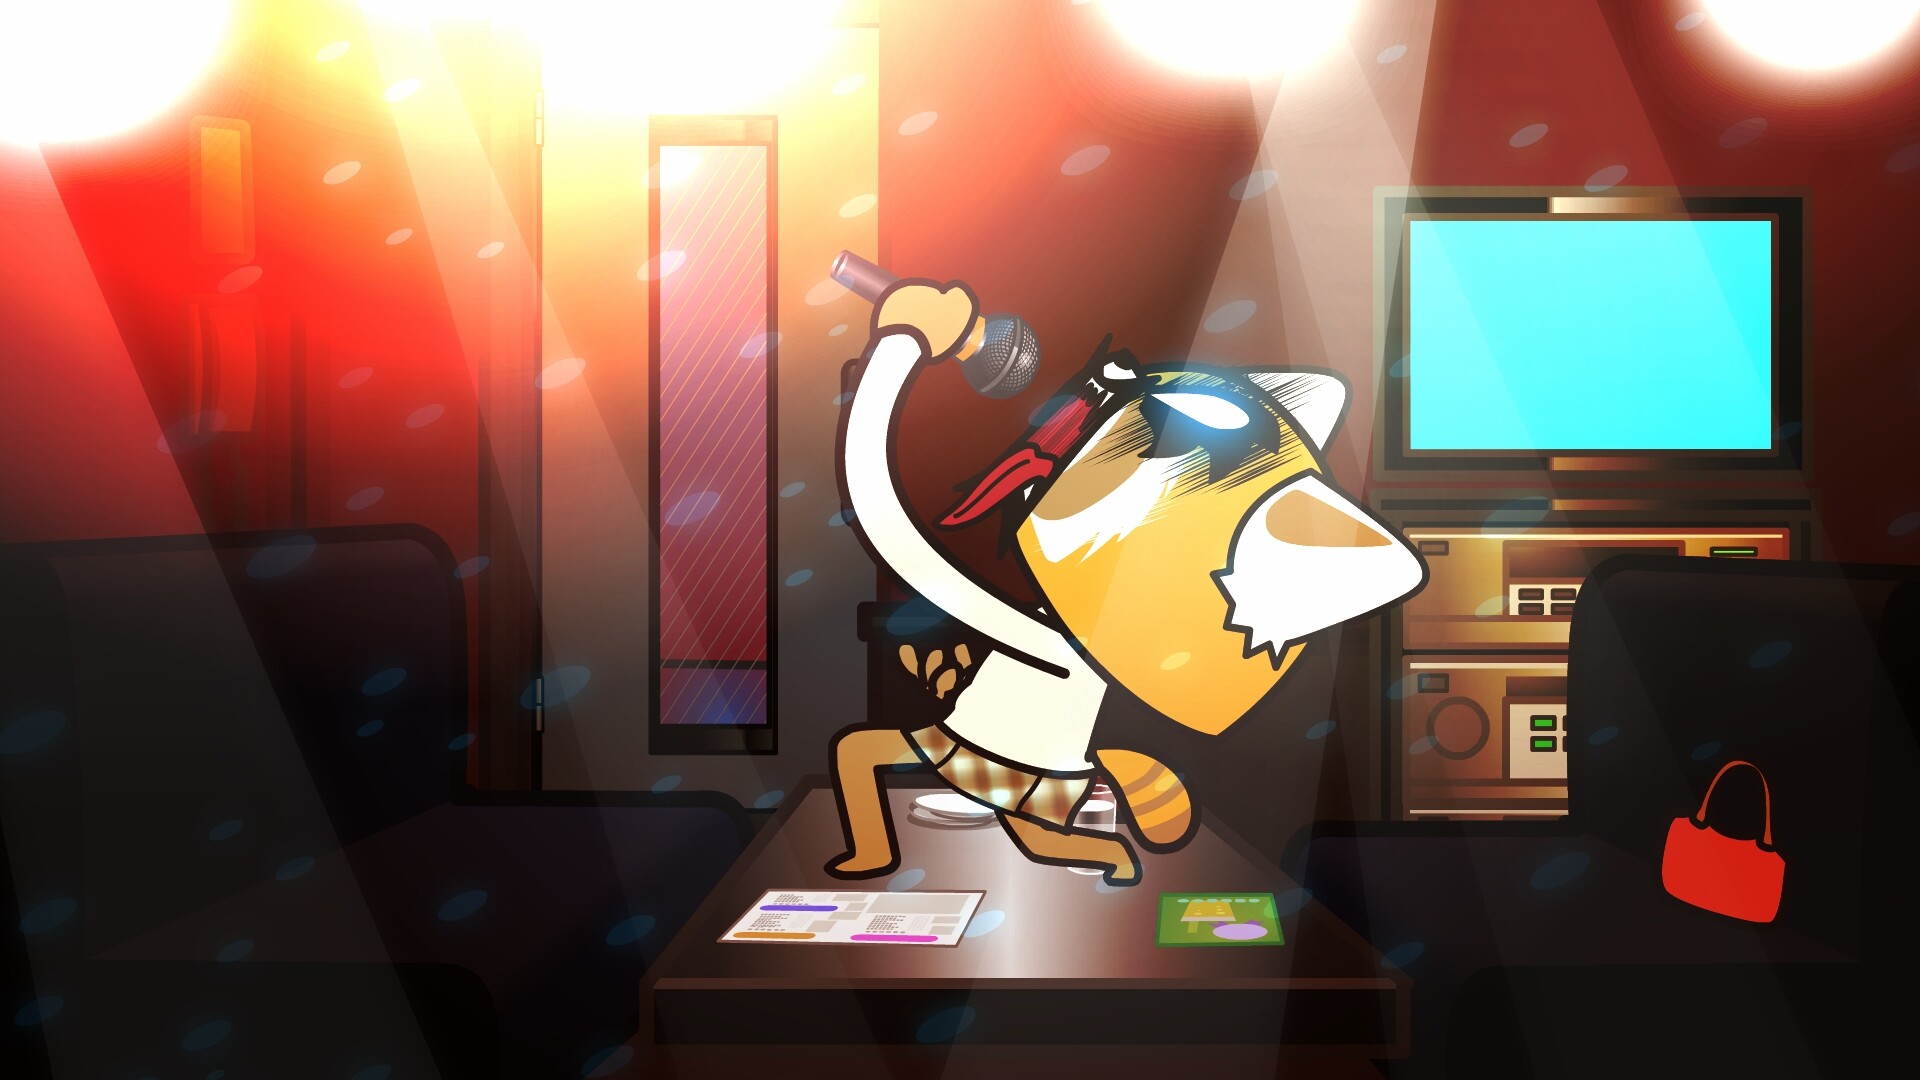 Aggretsuko: A Netflix original anime series about a single, 25-year-old anthropomorphic red panda. 1920x1080 Full HD Wallpaper.